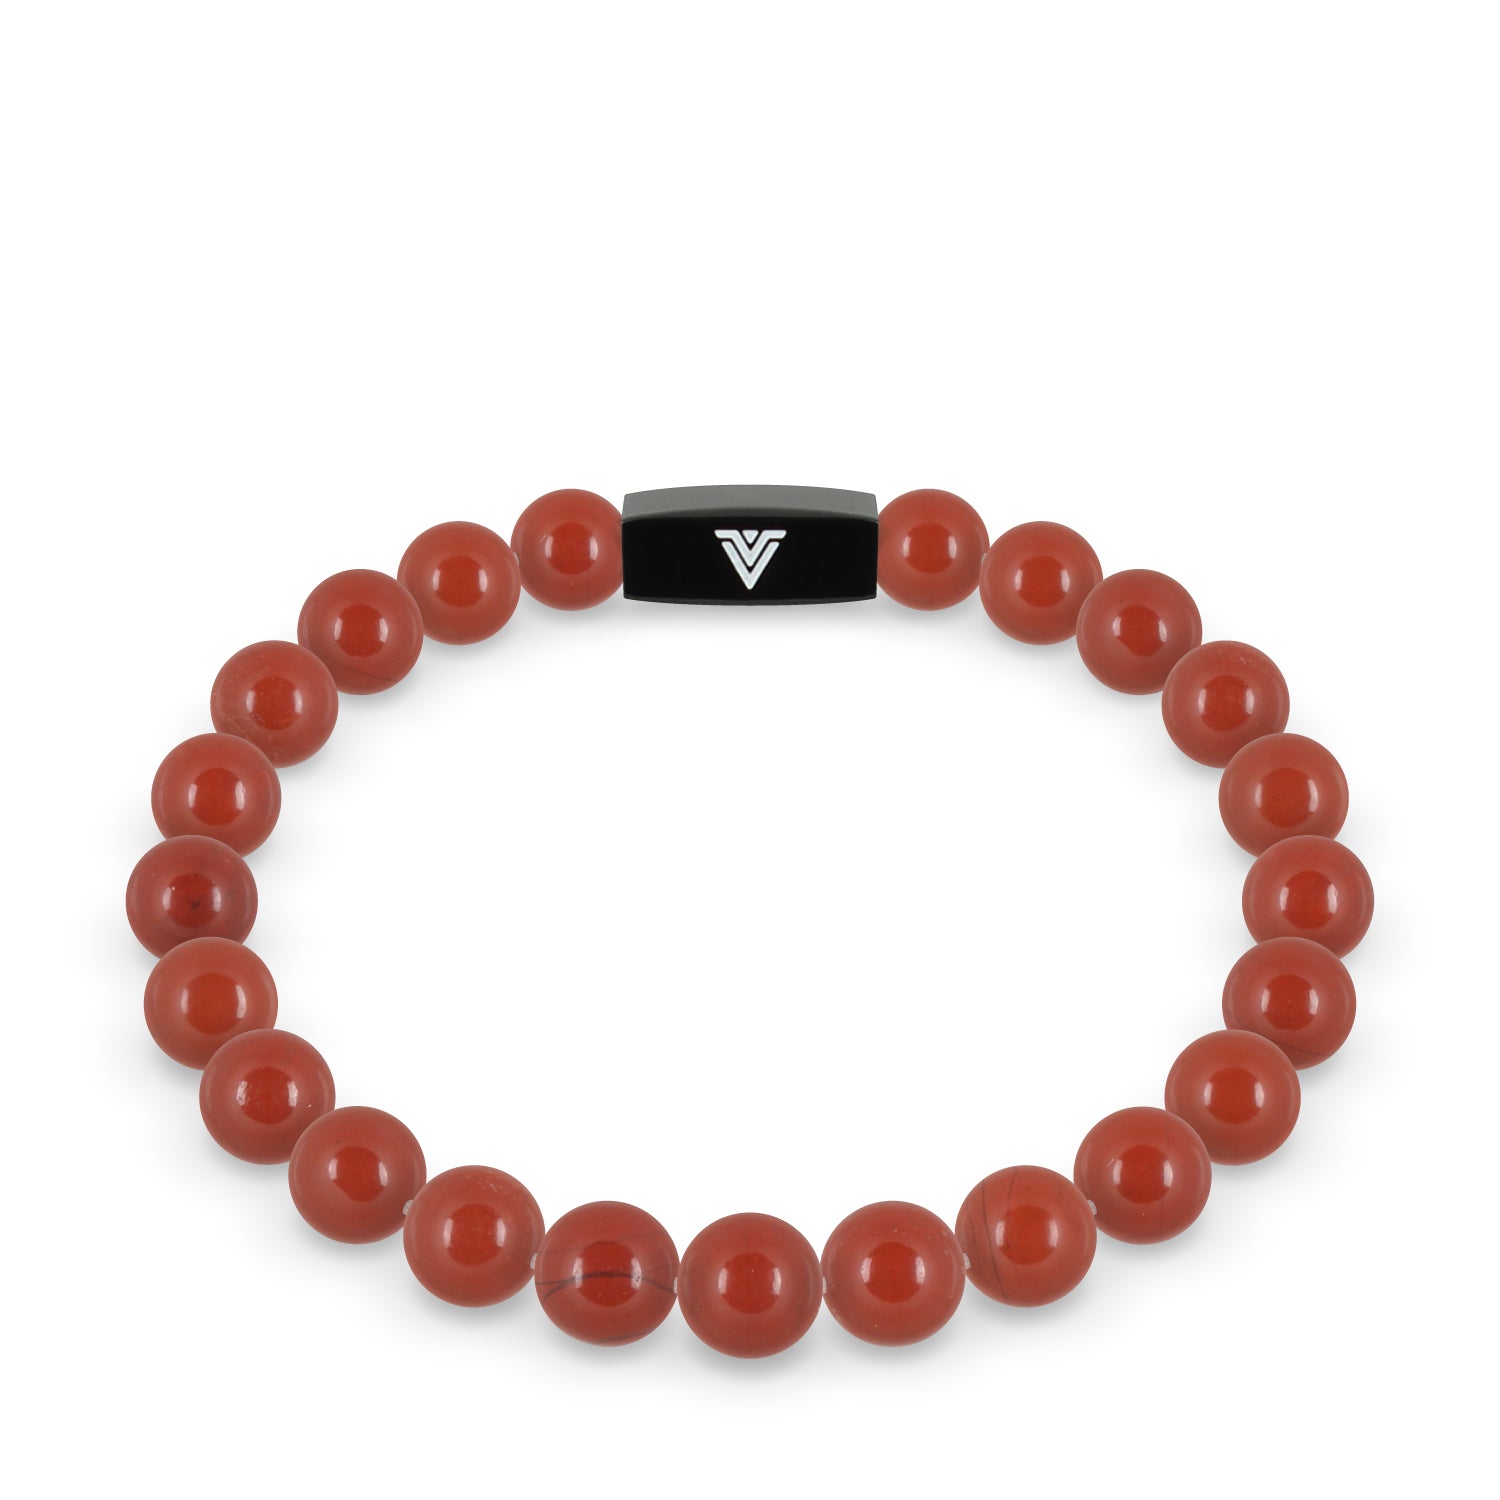 Front view of an 8mm Red Jasper crystal beaded stretch bracelet with black stainless steel logo bead made by Voltlin